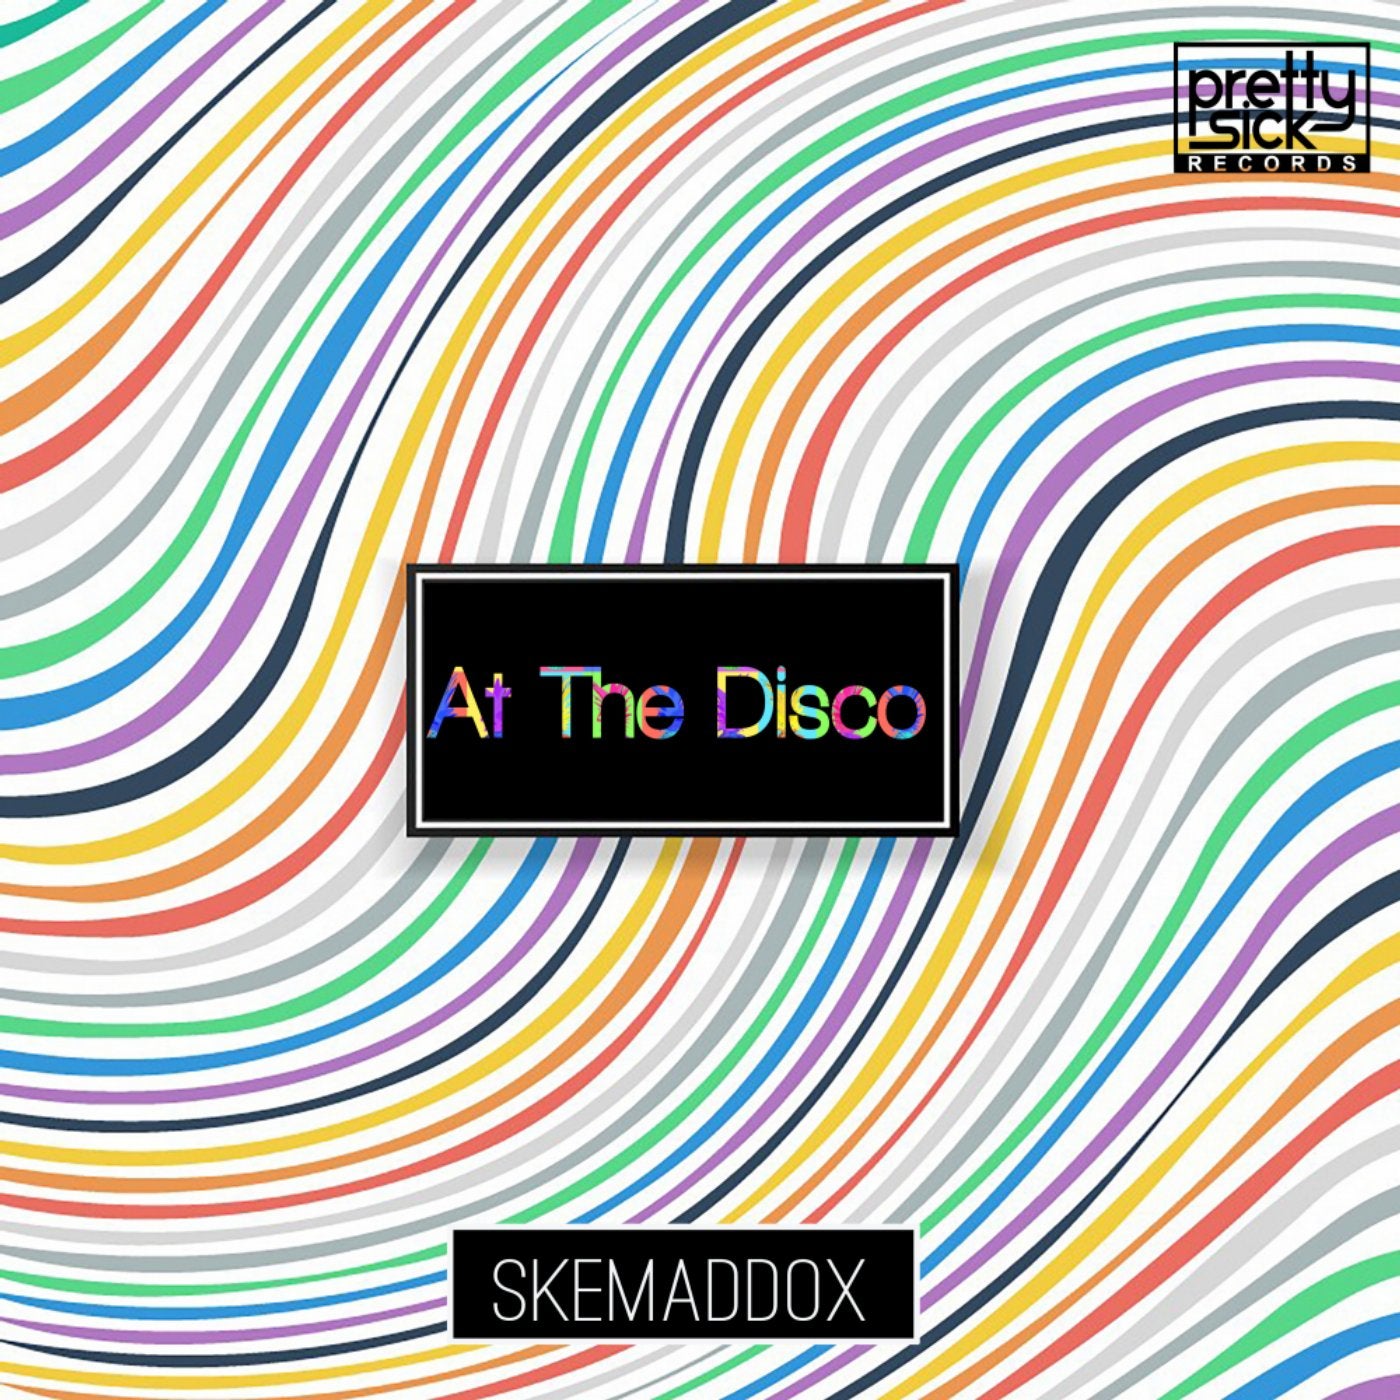 At The Disco